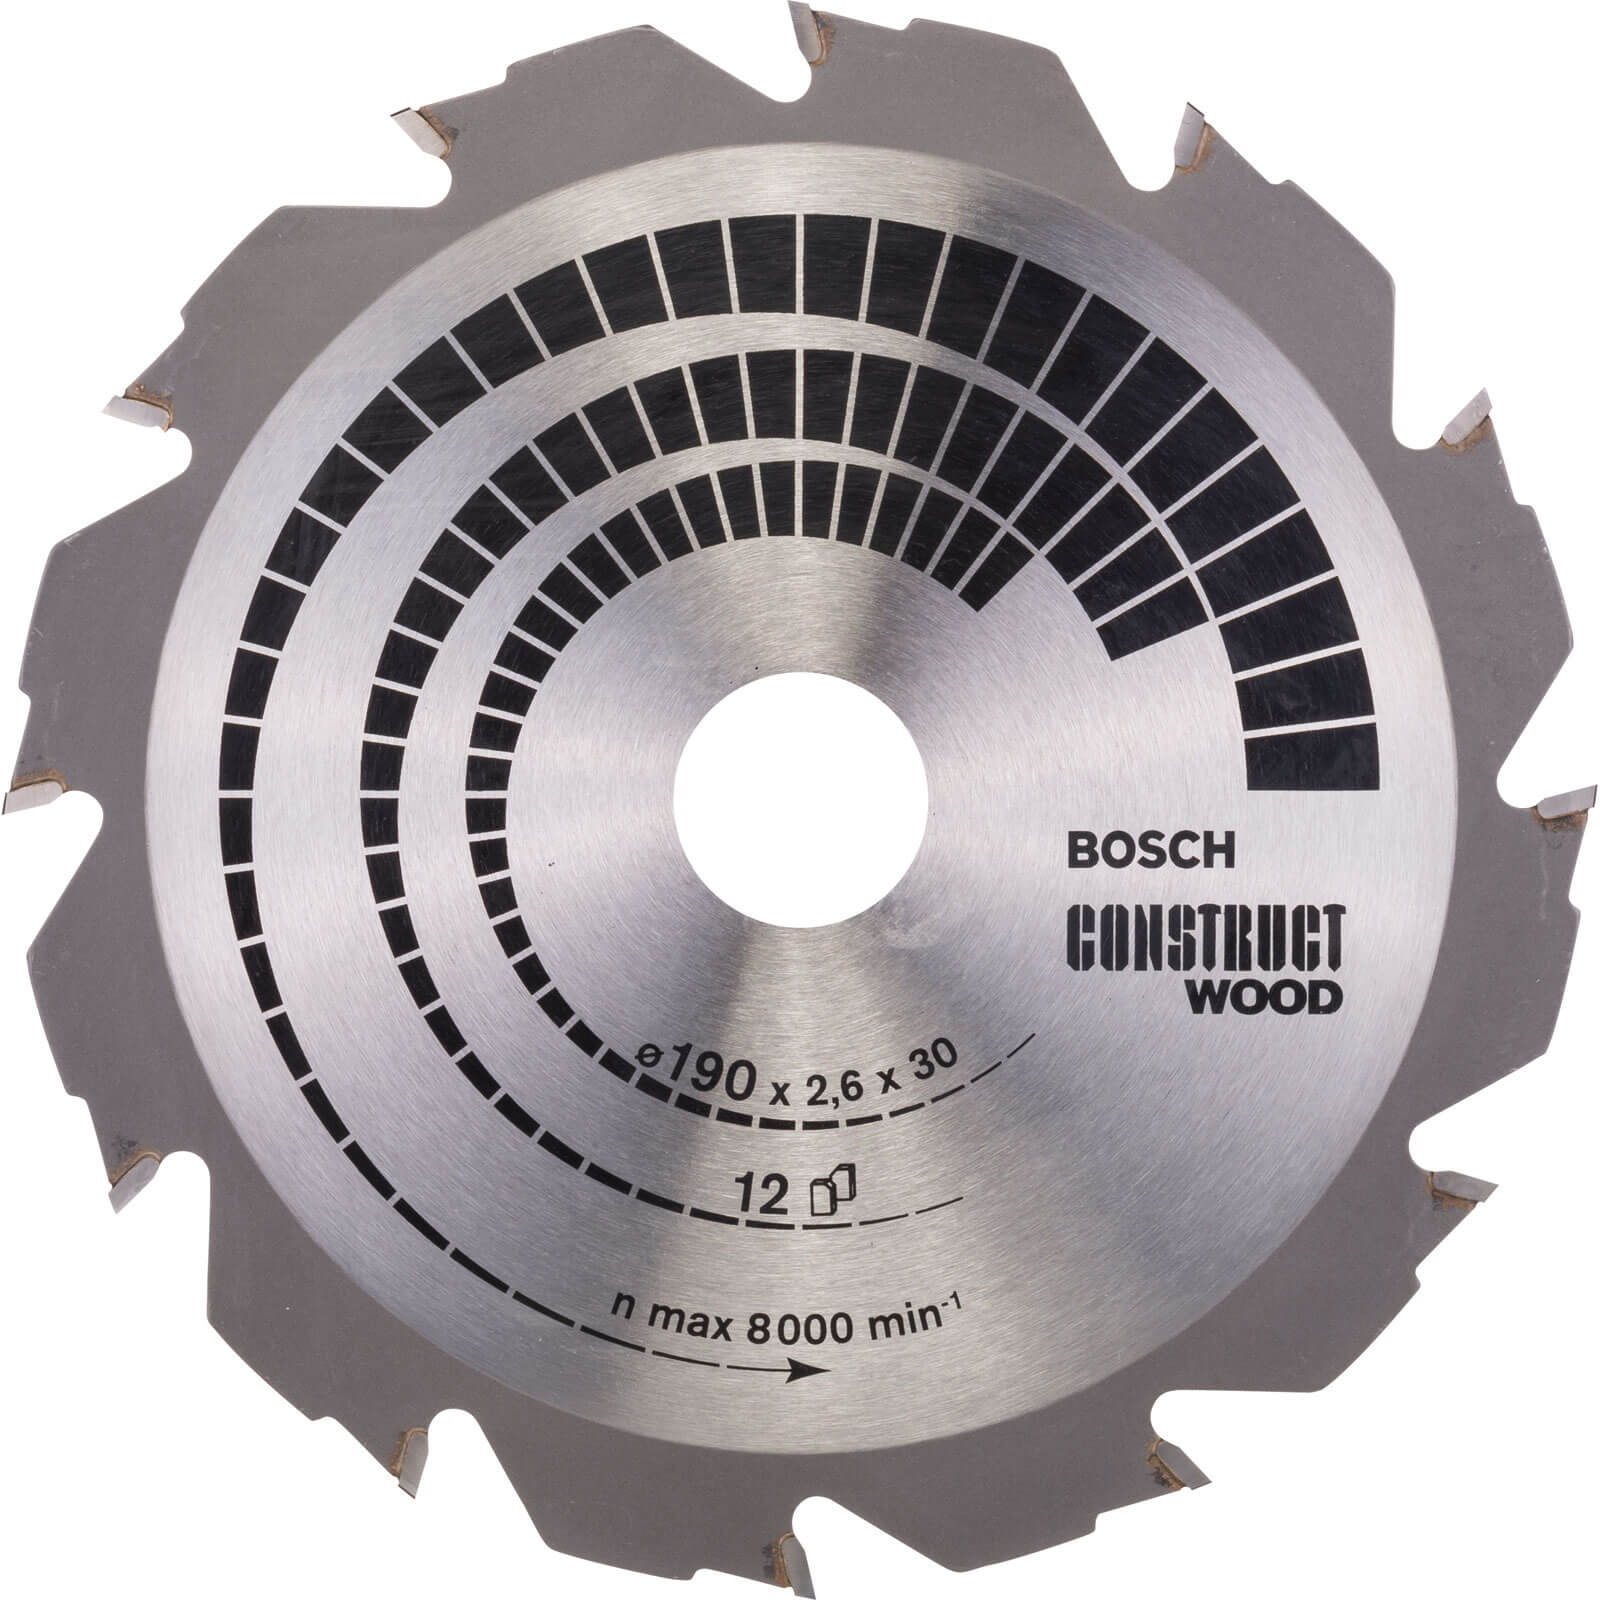 Photo of Bosch Construct Wood Cutting Saw Blade 190mm 12t 30mm